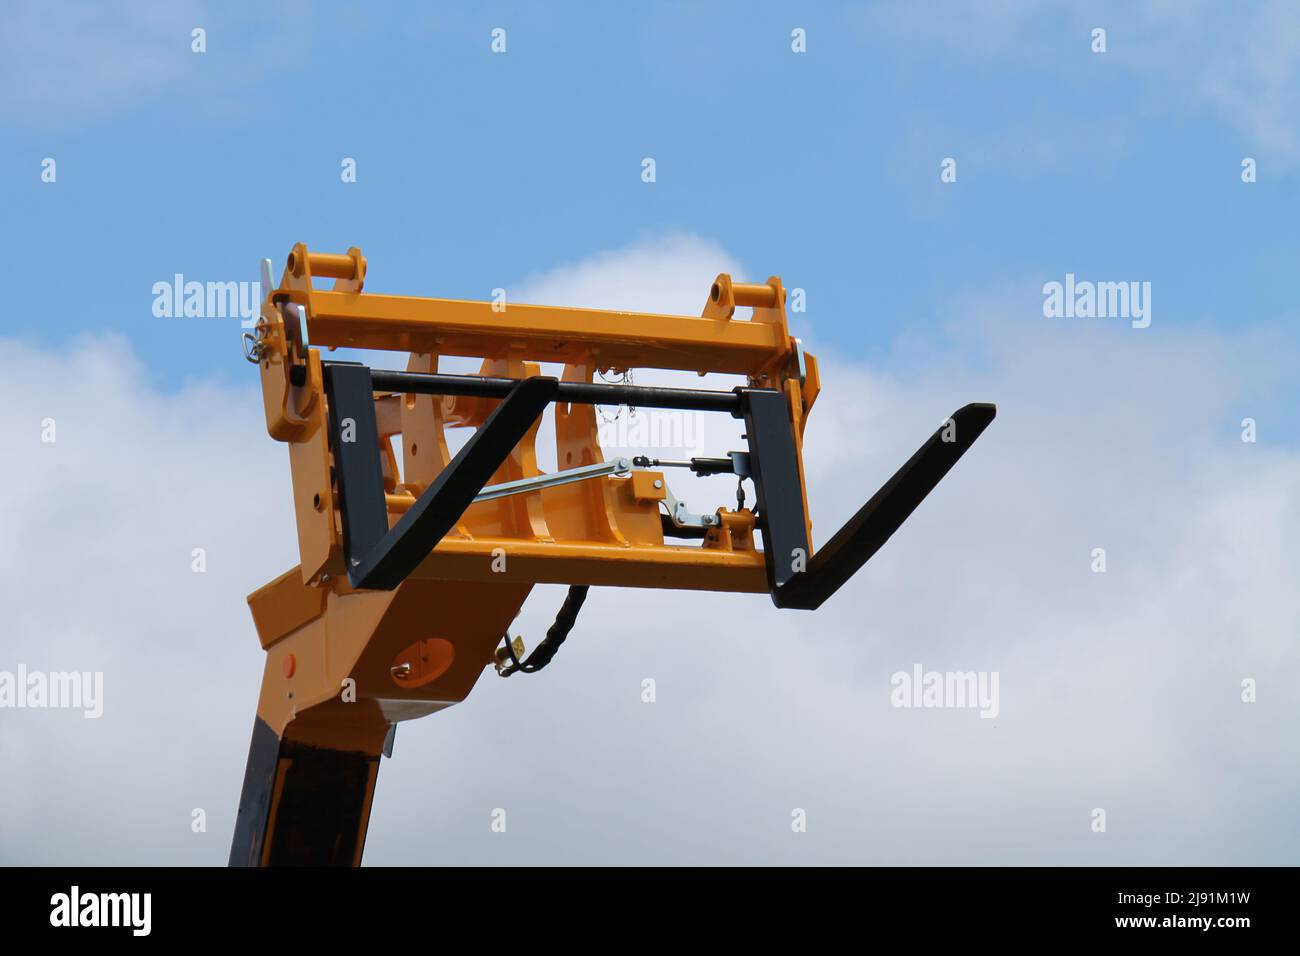 The Arm of a High Reach Hydraulic Fork Lift Truck. Stock Photo